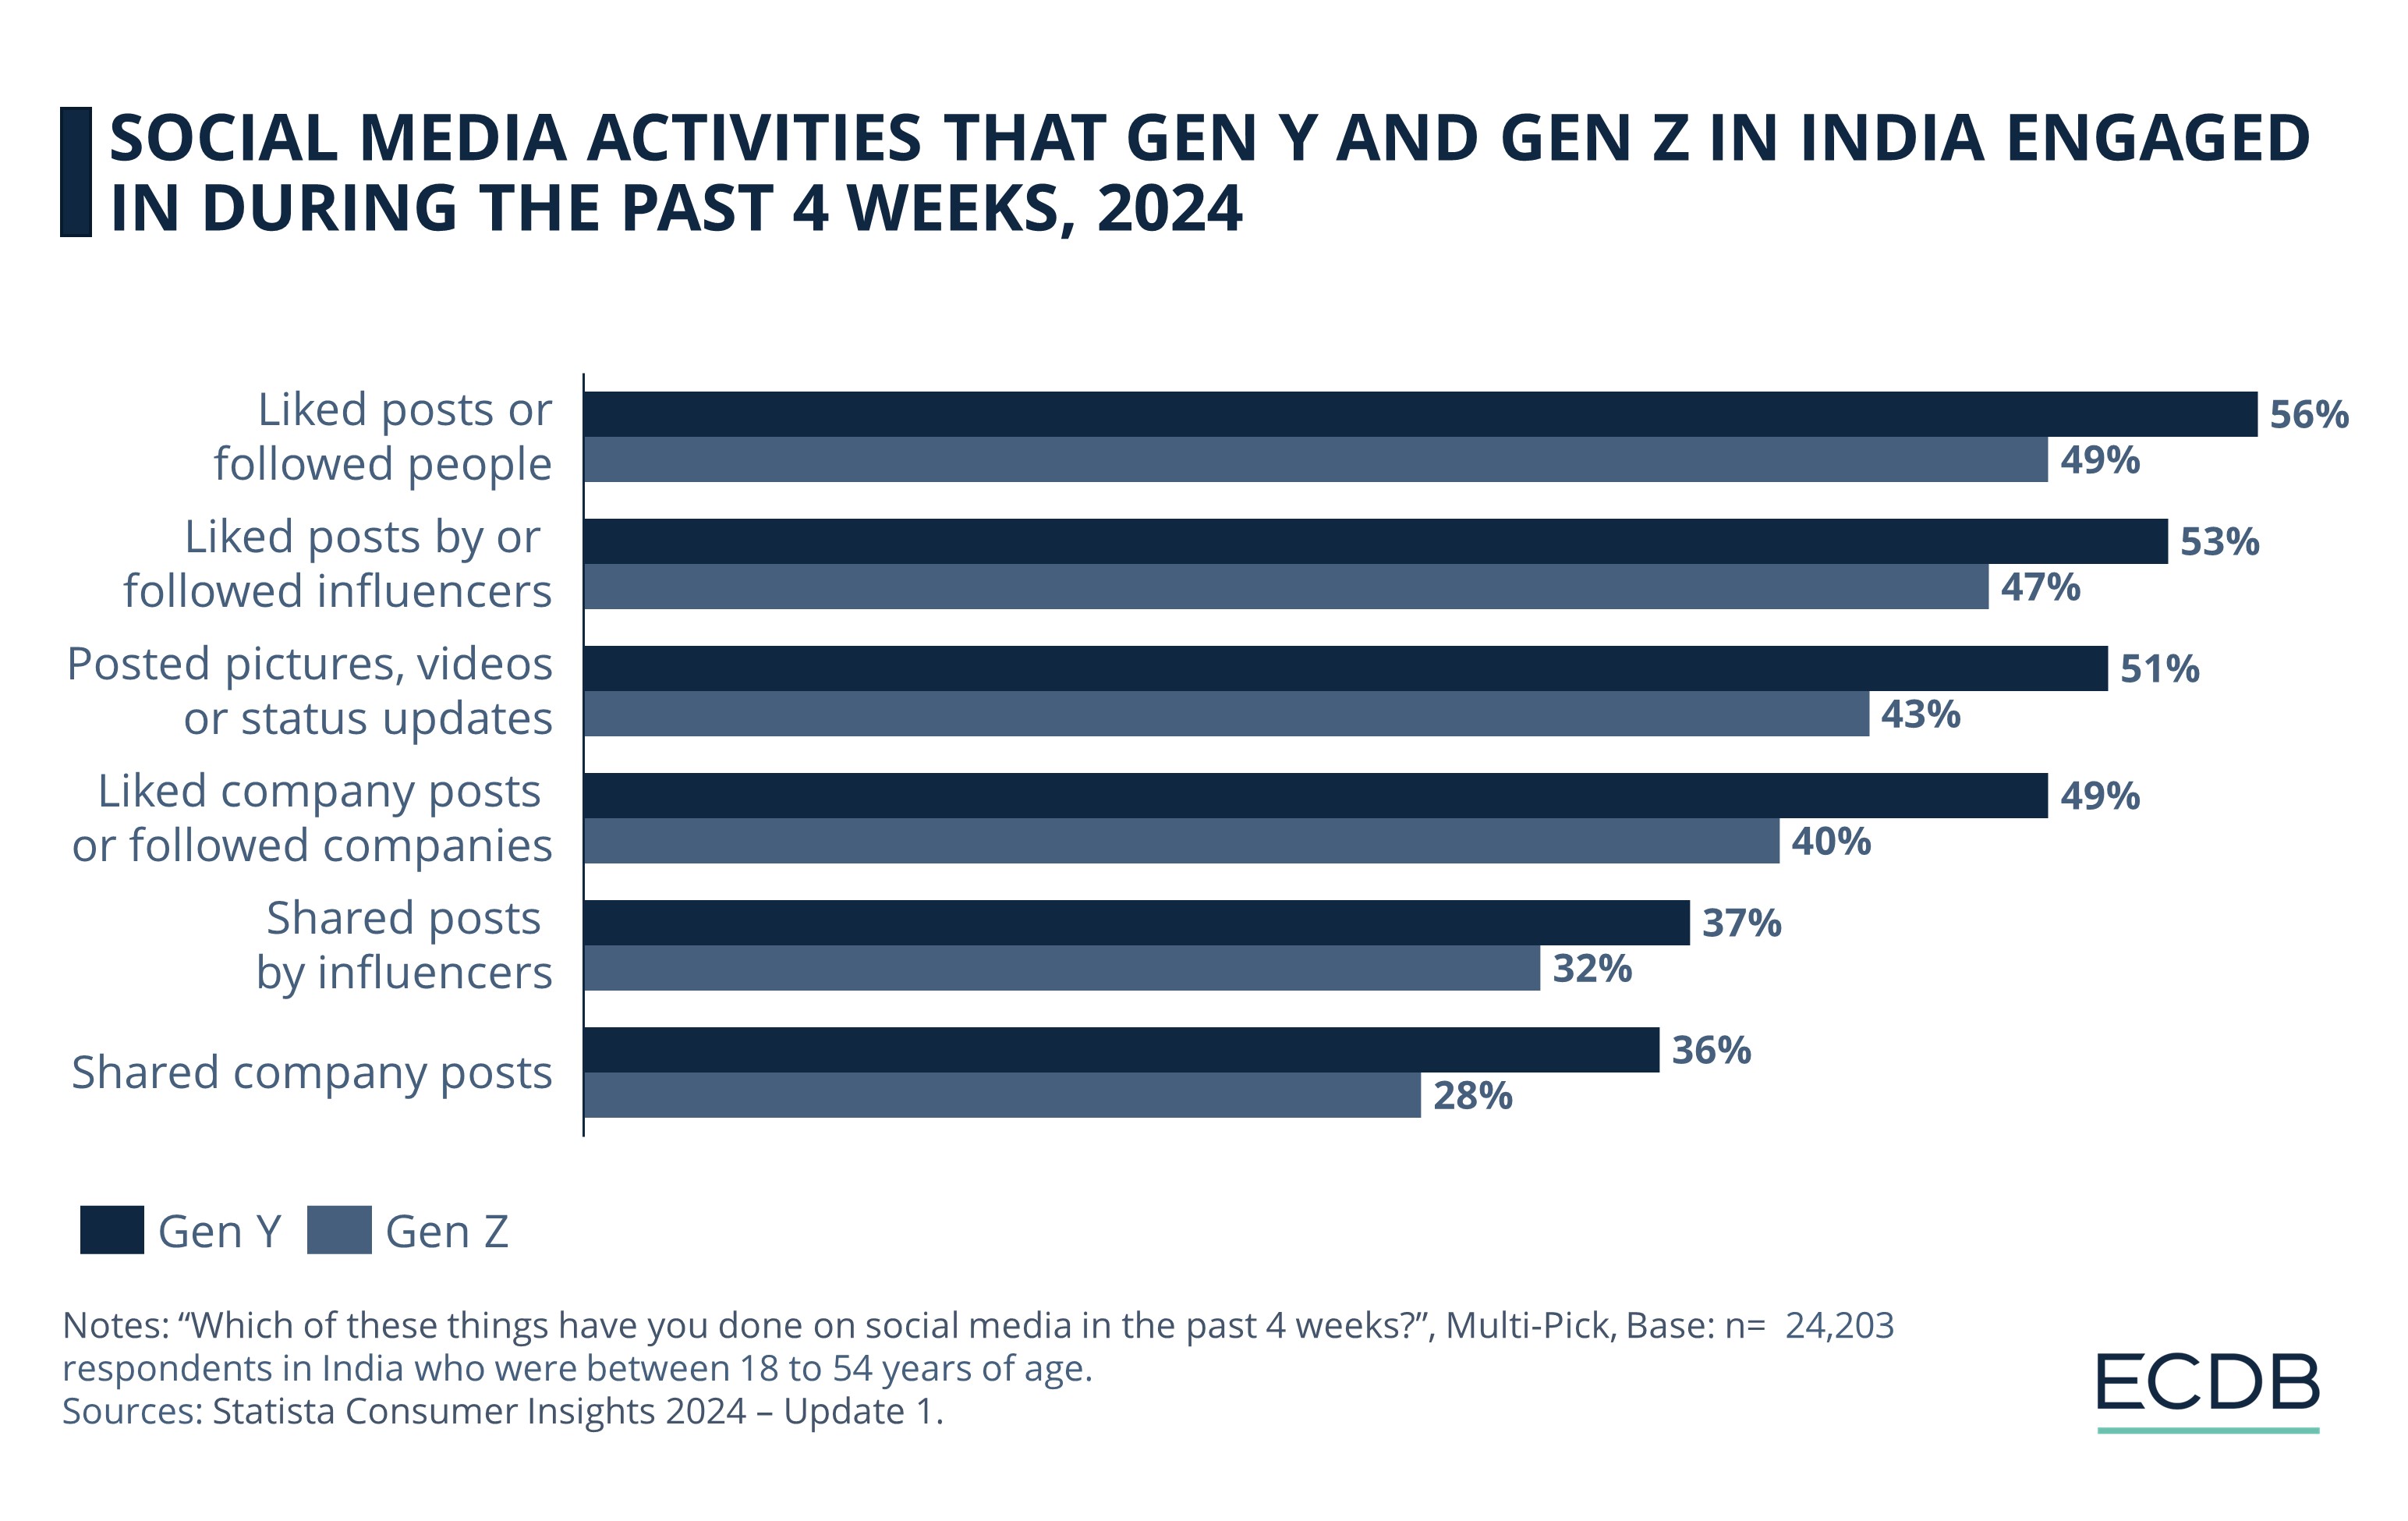 Social Media Activities That Gen Y And Gen Z In India Engaged in During the Past 4 Weeks, 2024